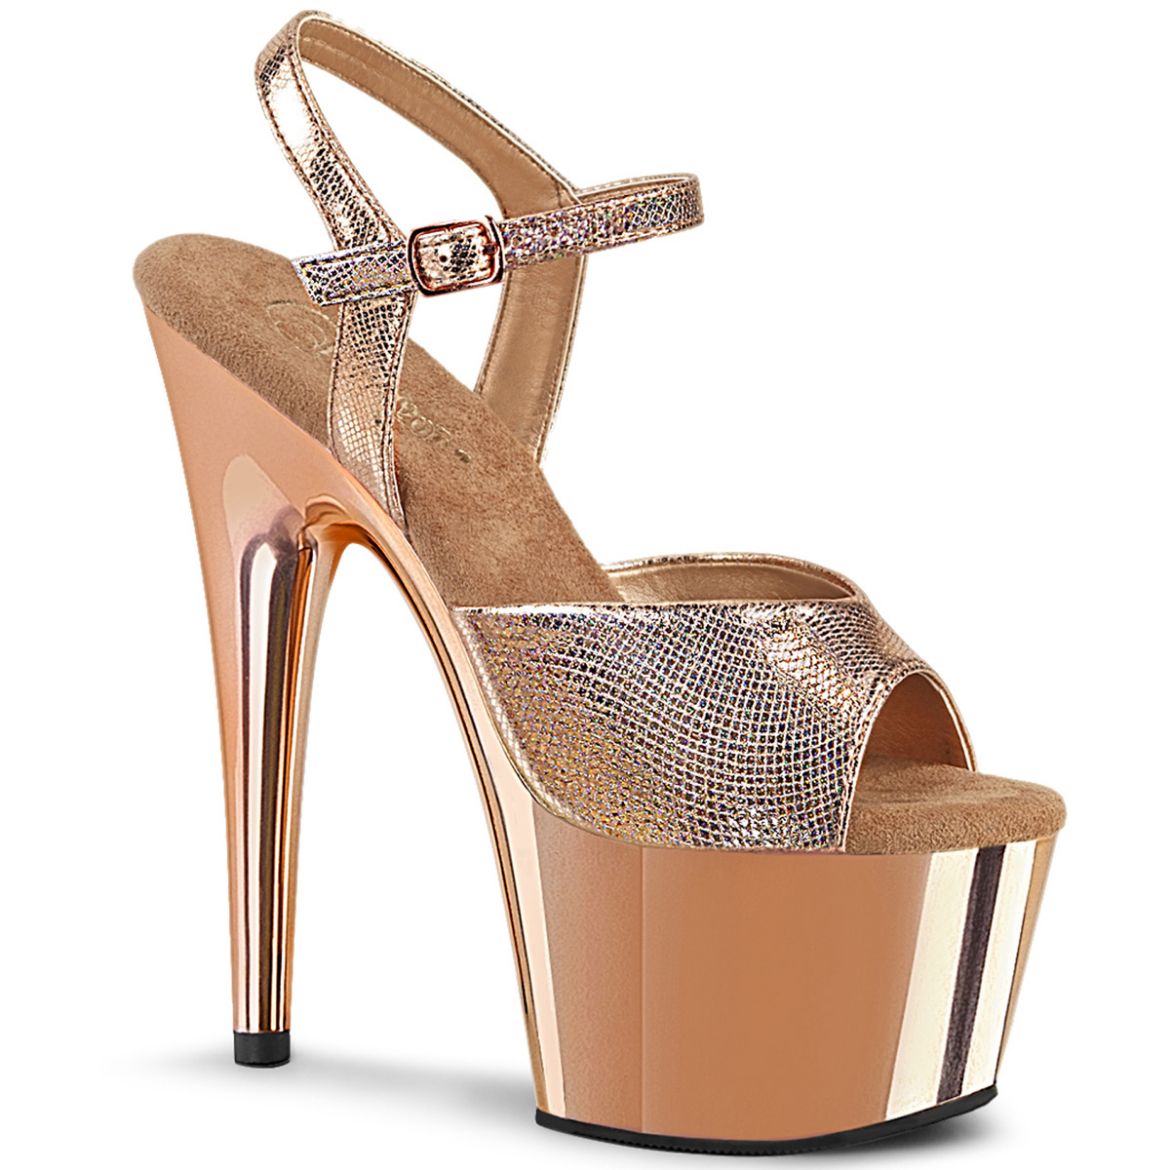 Product image of Pleaser ADORE-709 Rose Gold Textured Metallic/Rosegold Chrome 7 inch (17.8 cm) Heel 2 3/4 inch (7 cm) Platform Ankle Strap Sandal Shoes